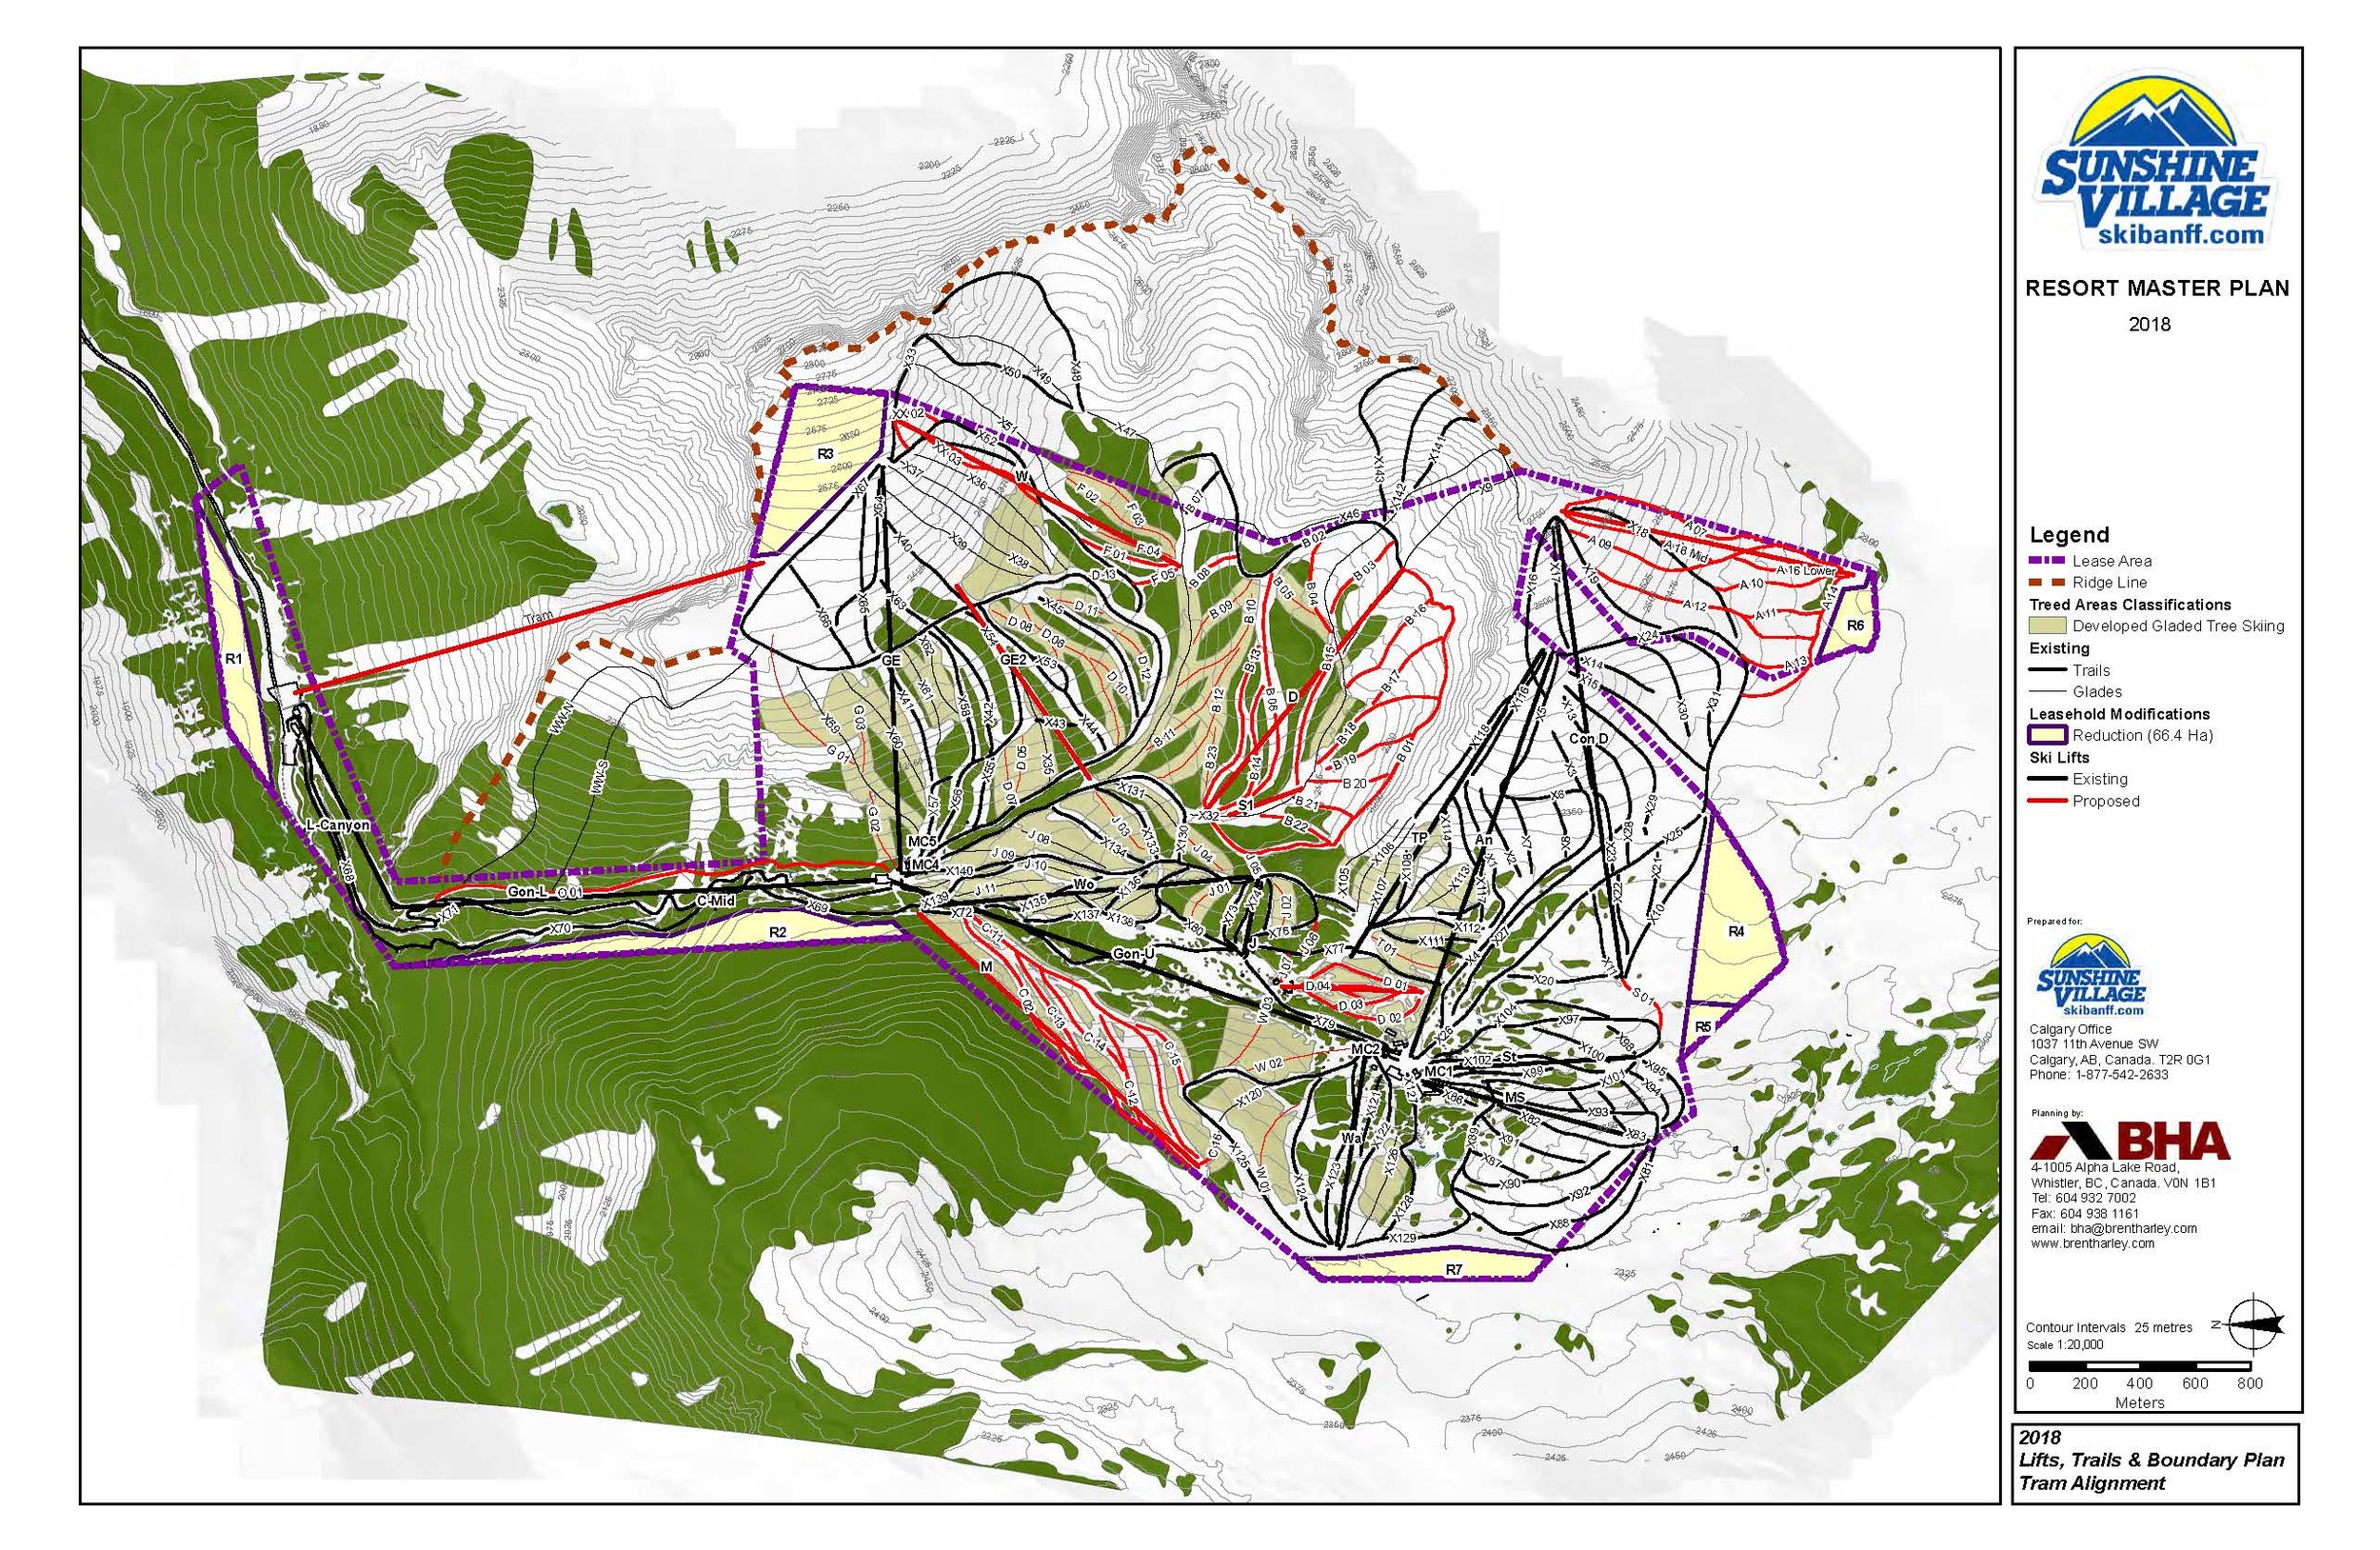 (1 to 20,000) Sunshine - Lifts Trails and Boundary Plan (Tram Alignment) (11x17) - July 3 2018.jpg